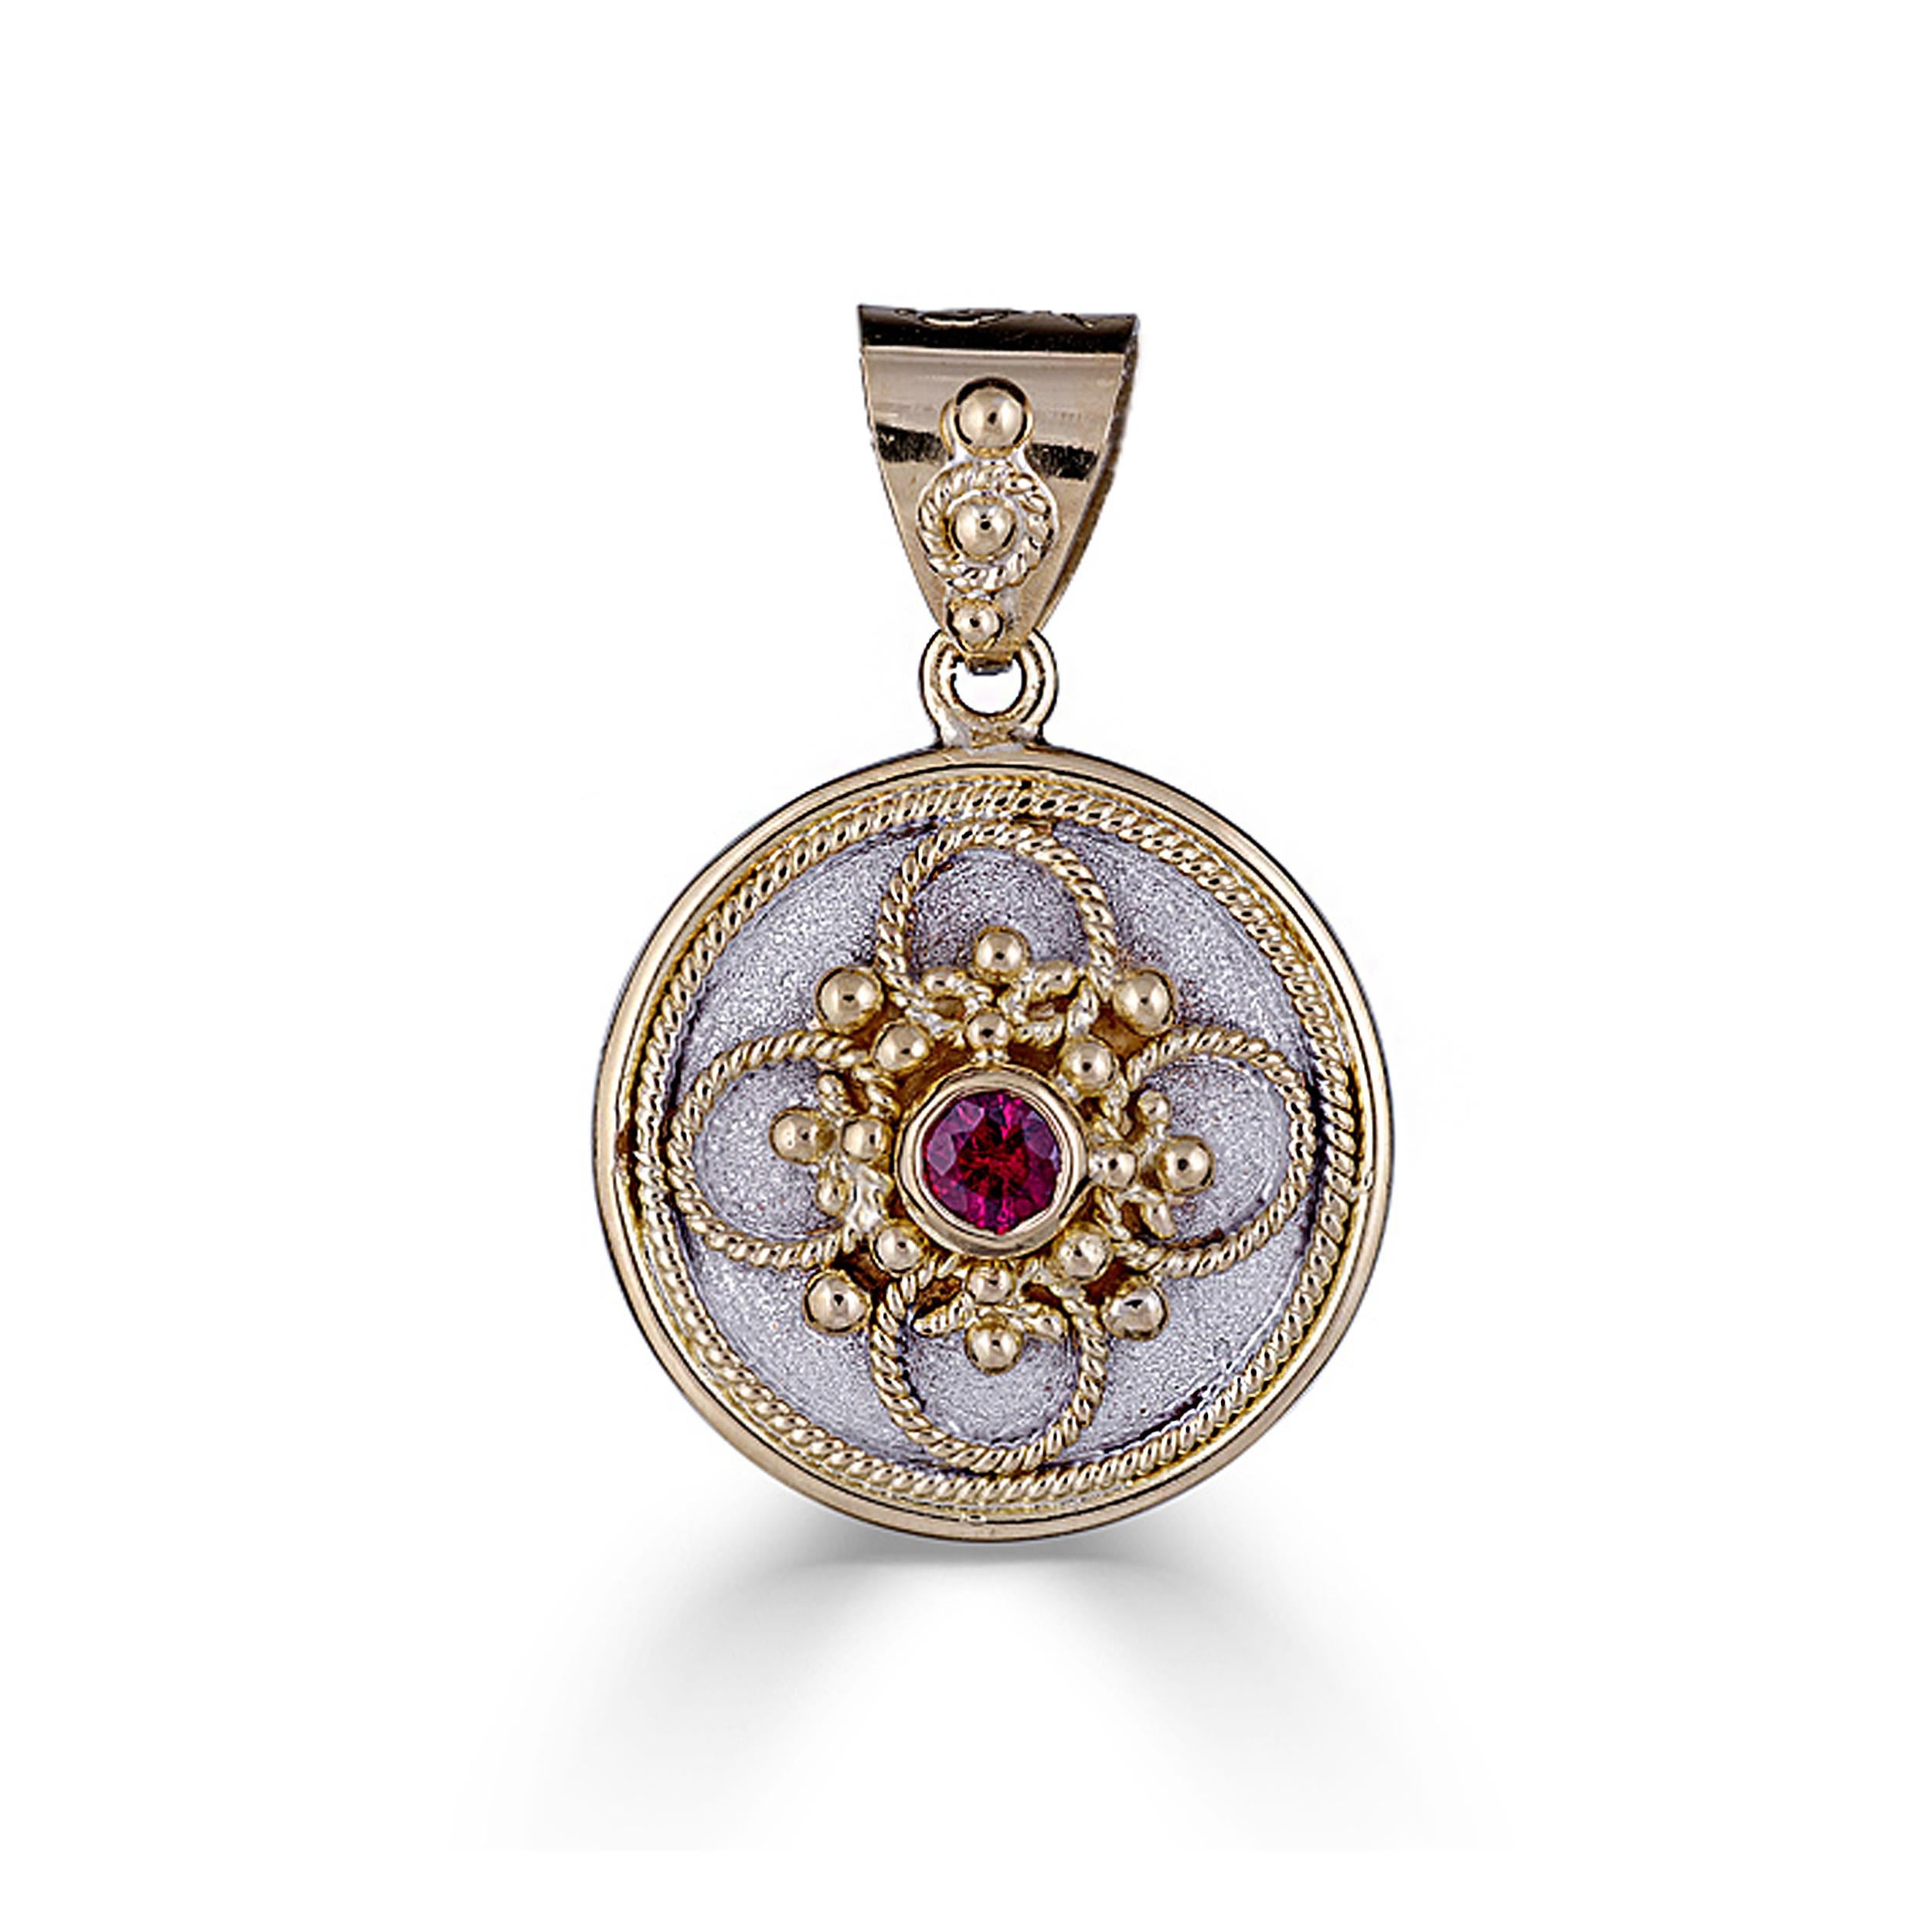 S.Georgios unique designer pendant all handmade from solid 18 Karat yellow Gold. This pendant is microscopically decorated - it has granulation work all the way around with gold beads and wires shaped as the last letter of the Greek Alphabet -